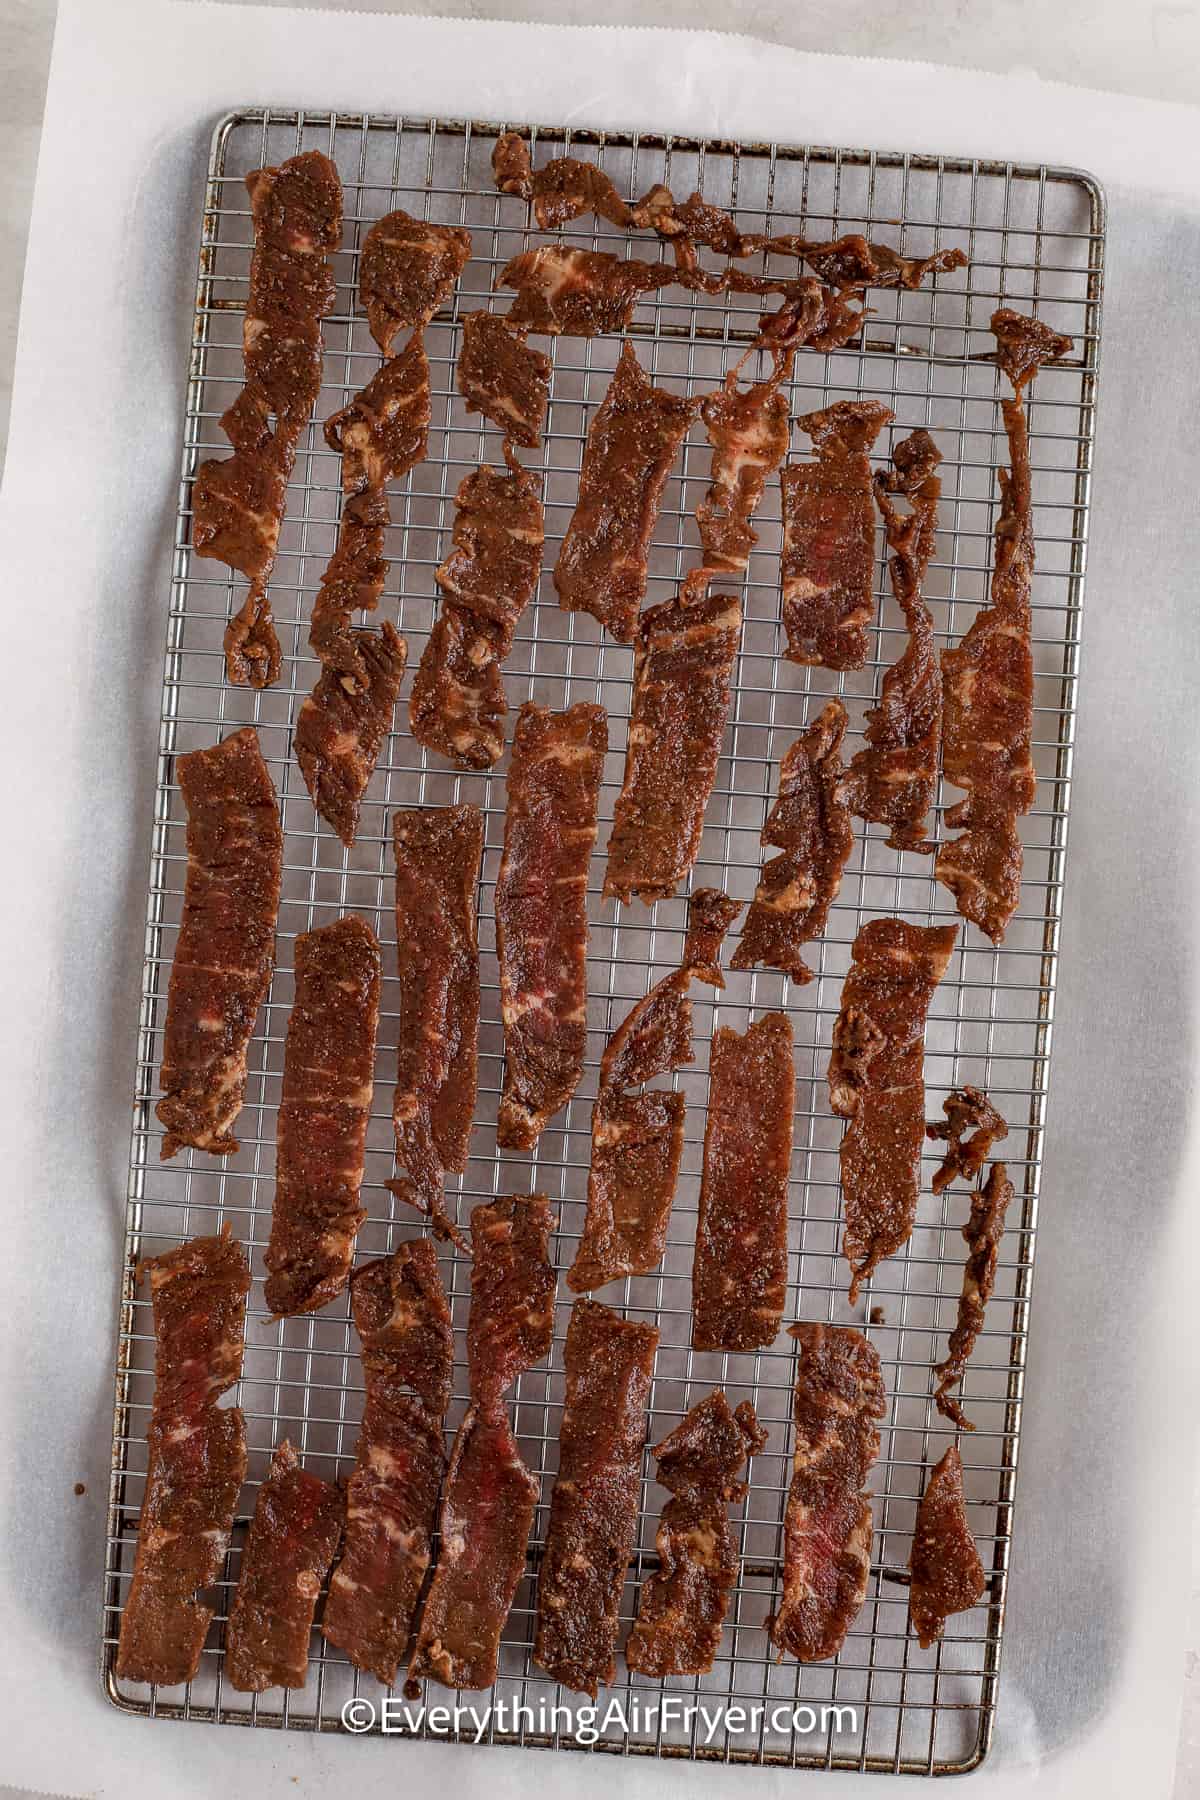 marinated steak strips on a drying rack